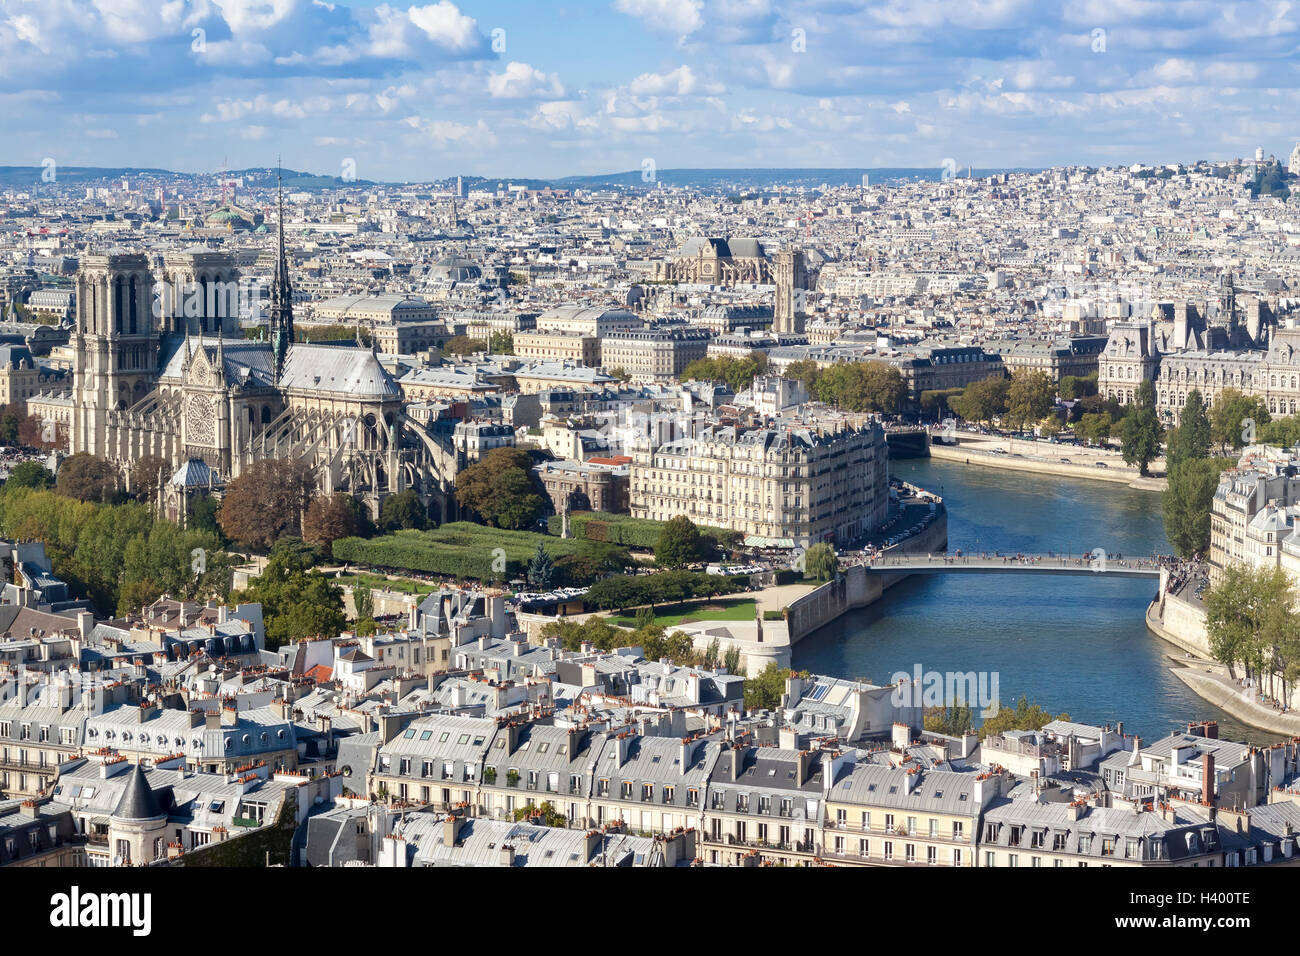 Aerial view of Notre-Dame cathedral and Paris roofs Stock Photo